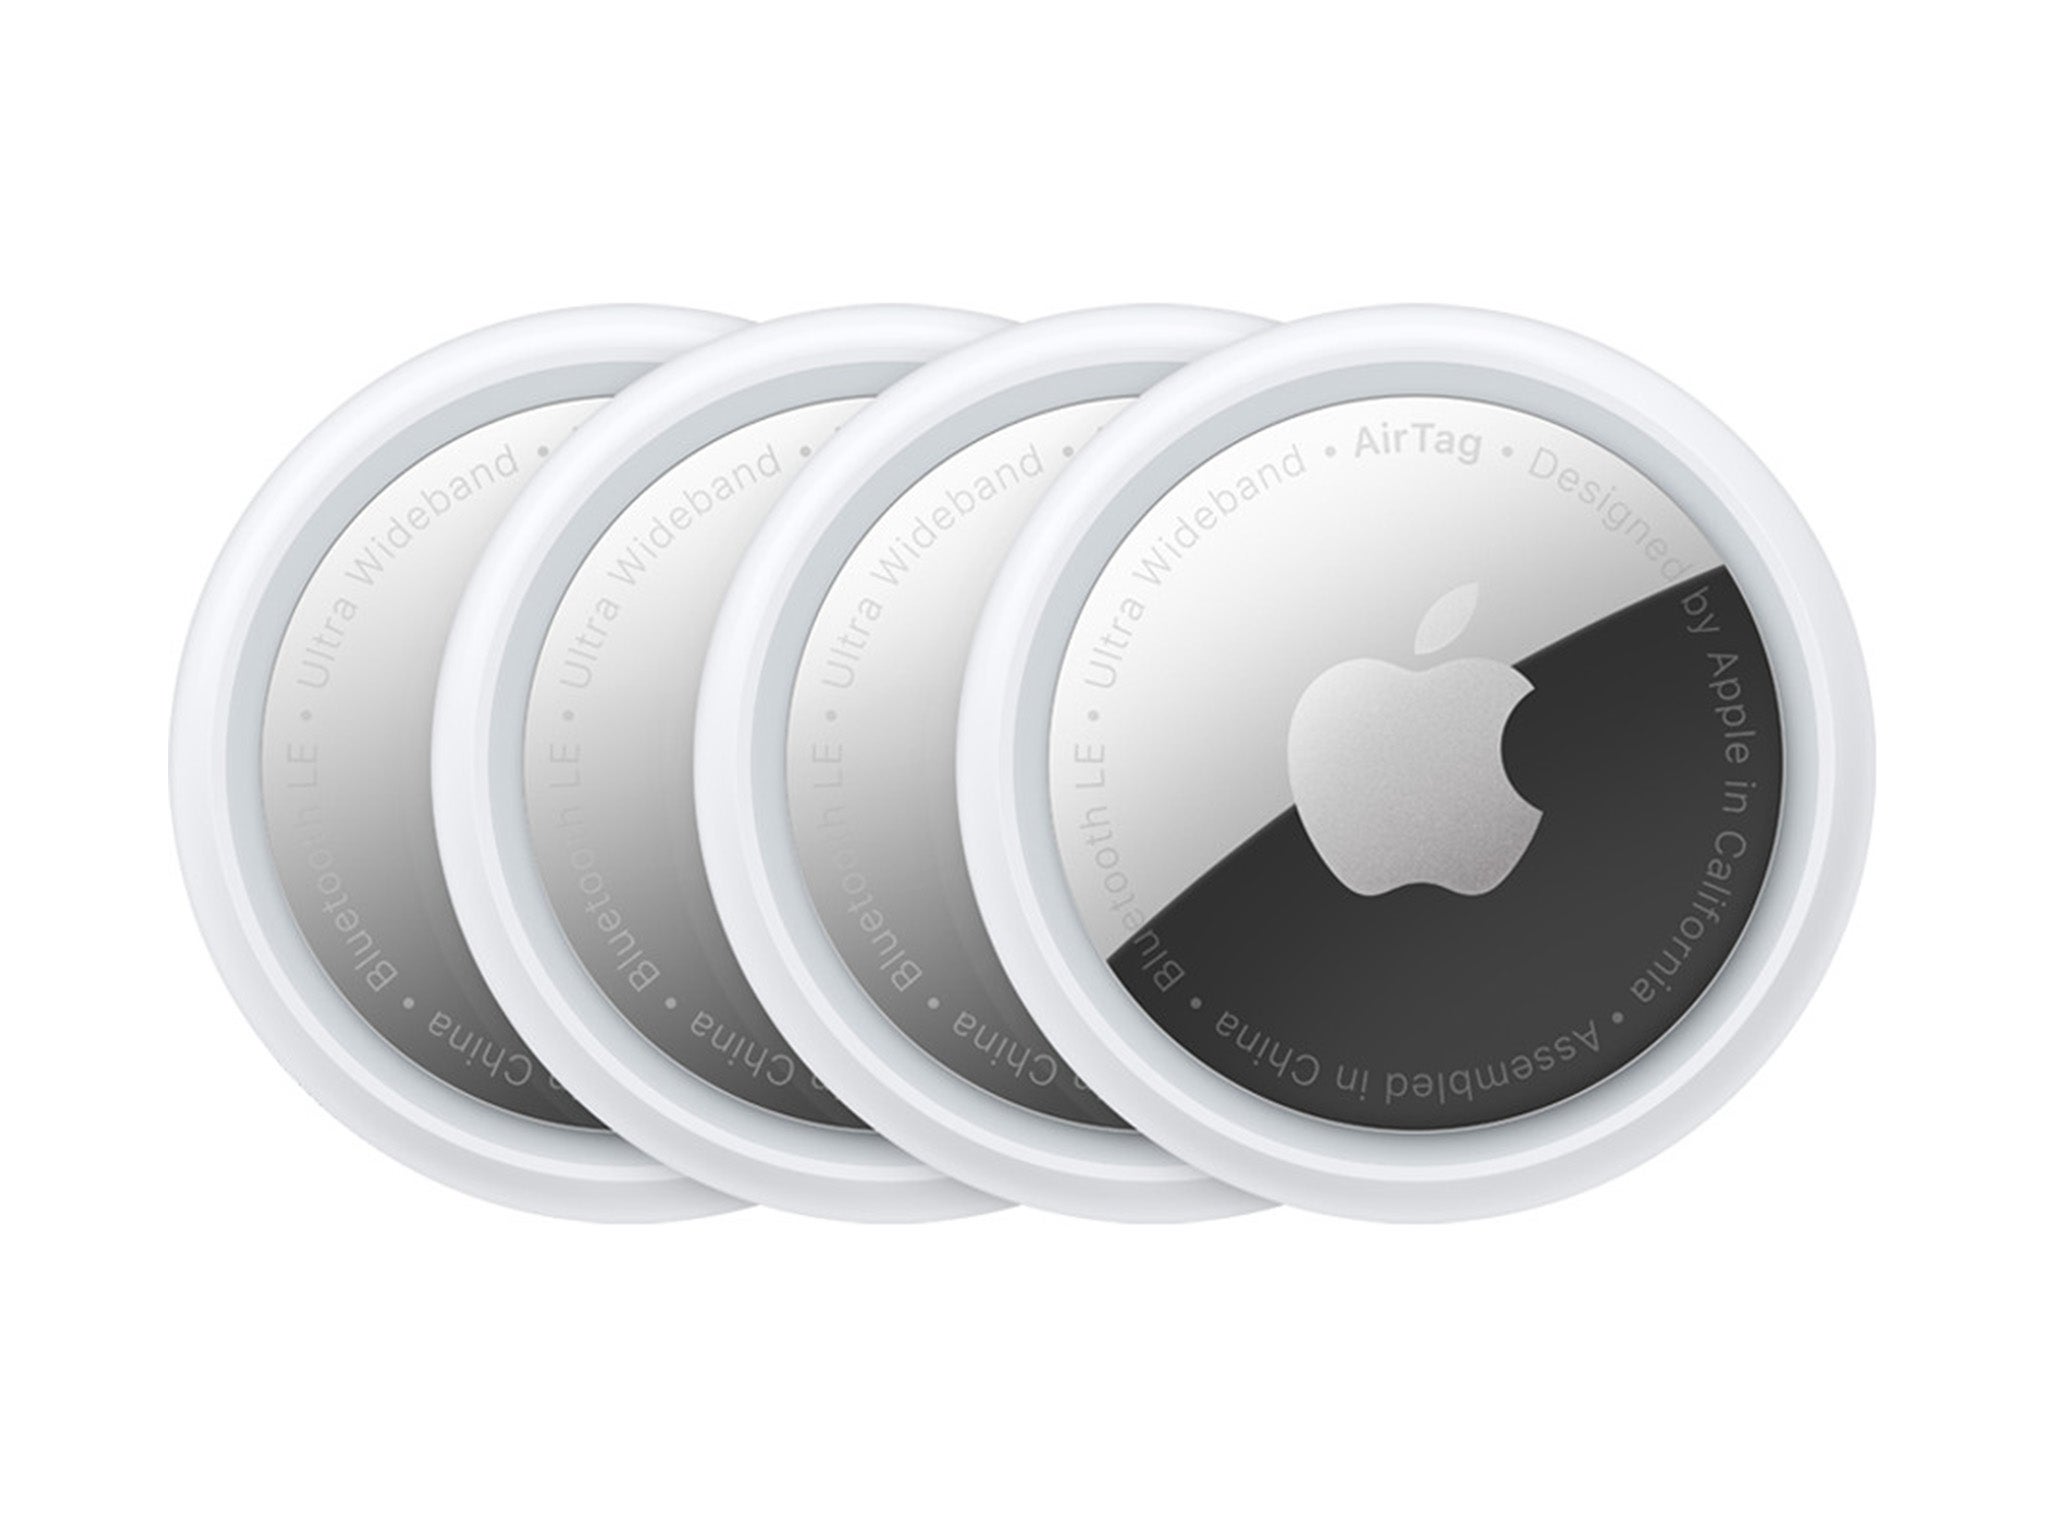 Apple AirTag with Ultra-Wideband (UWB) unveiled to take on the